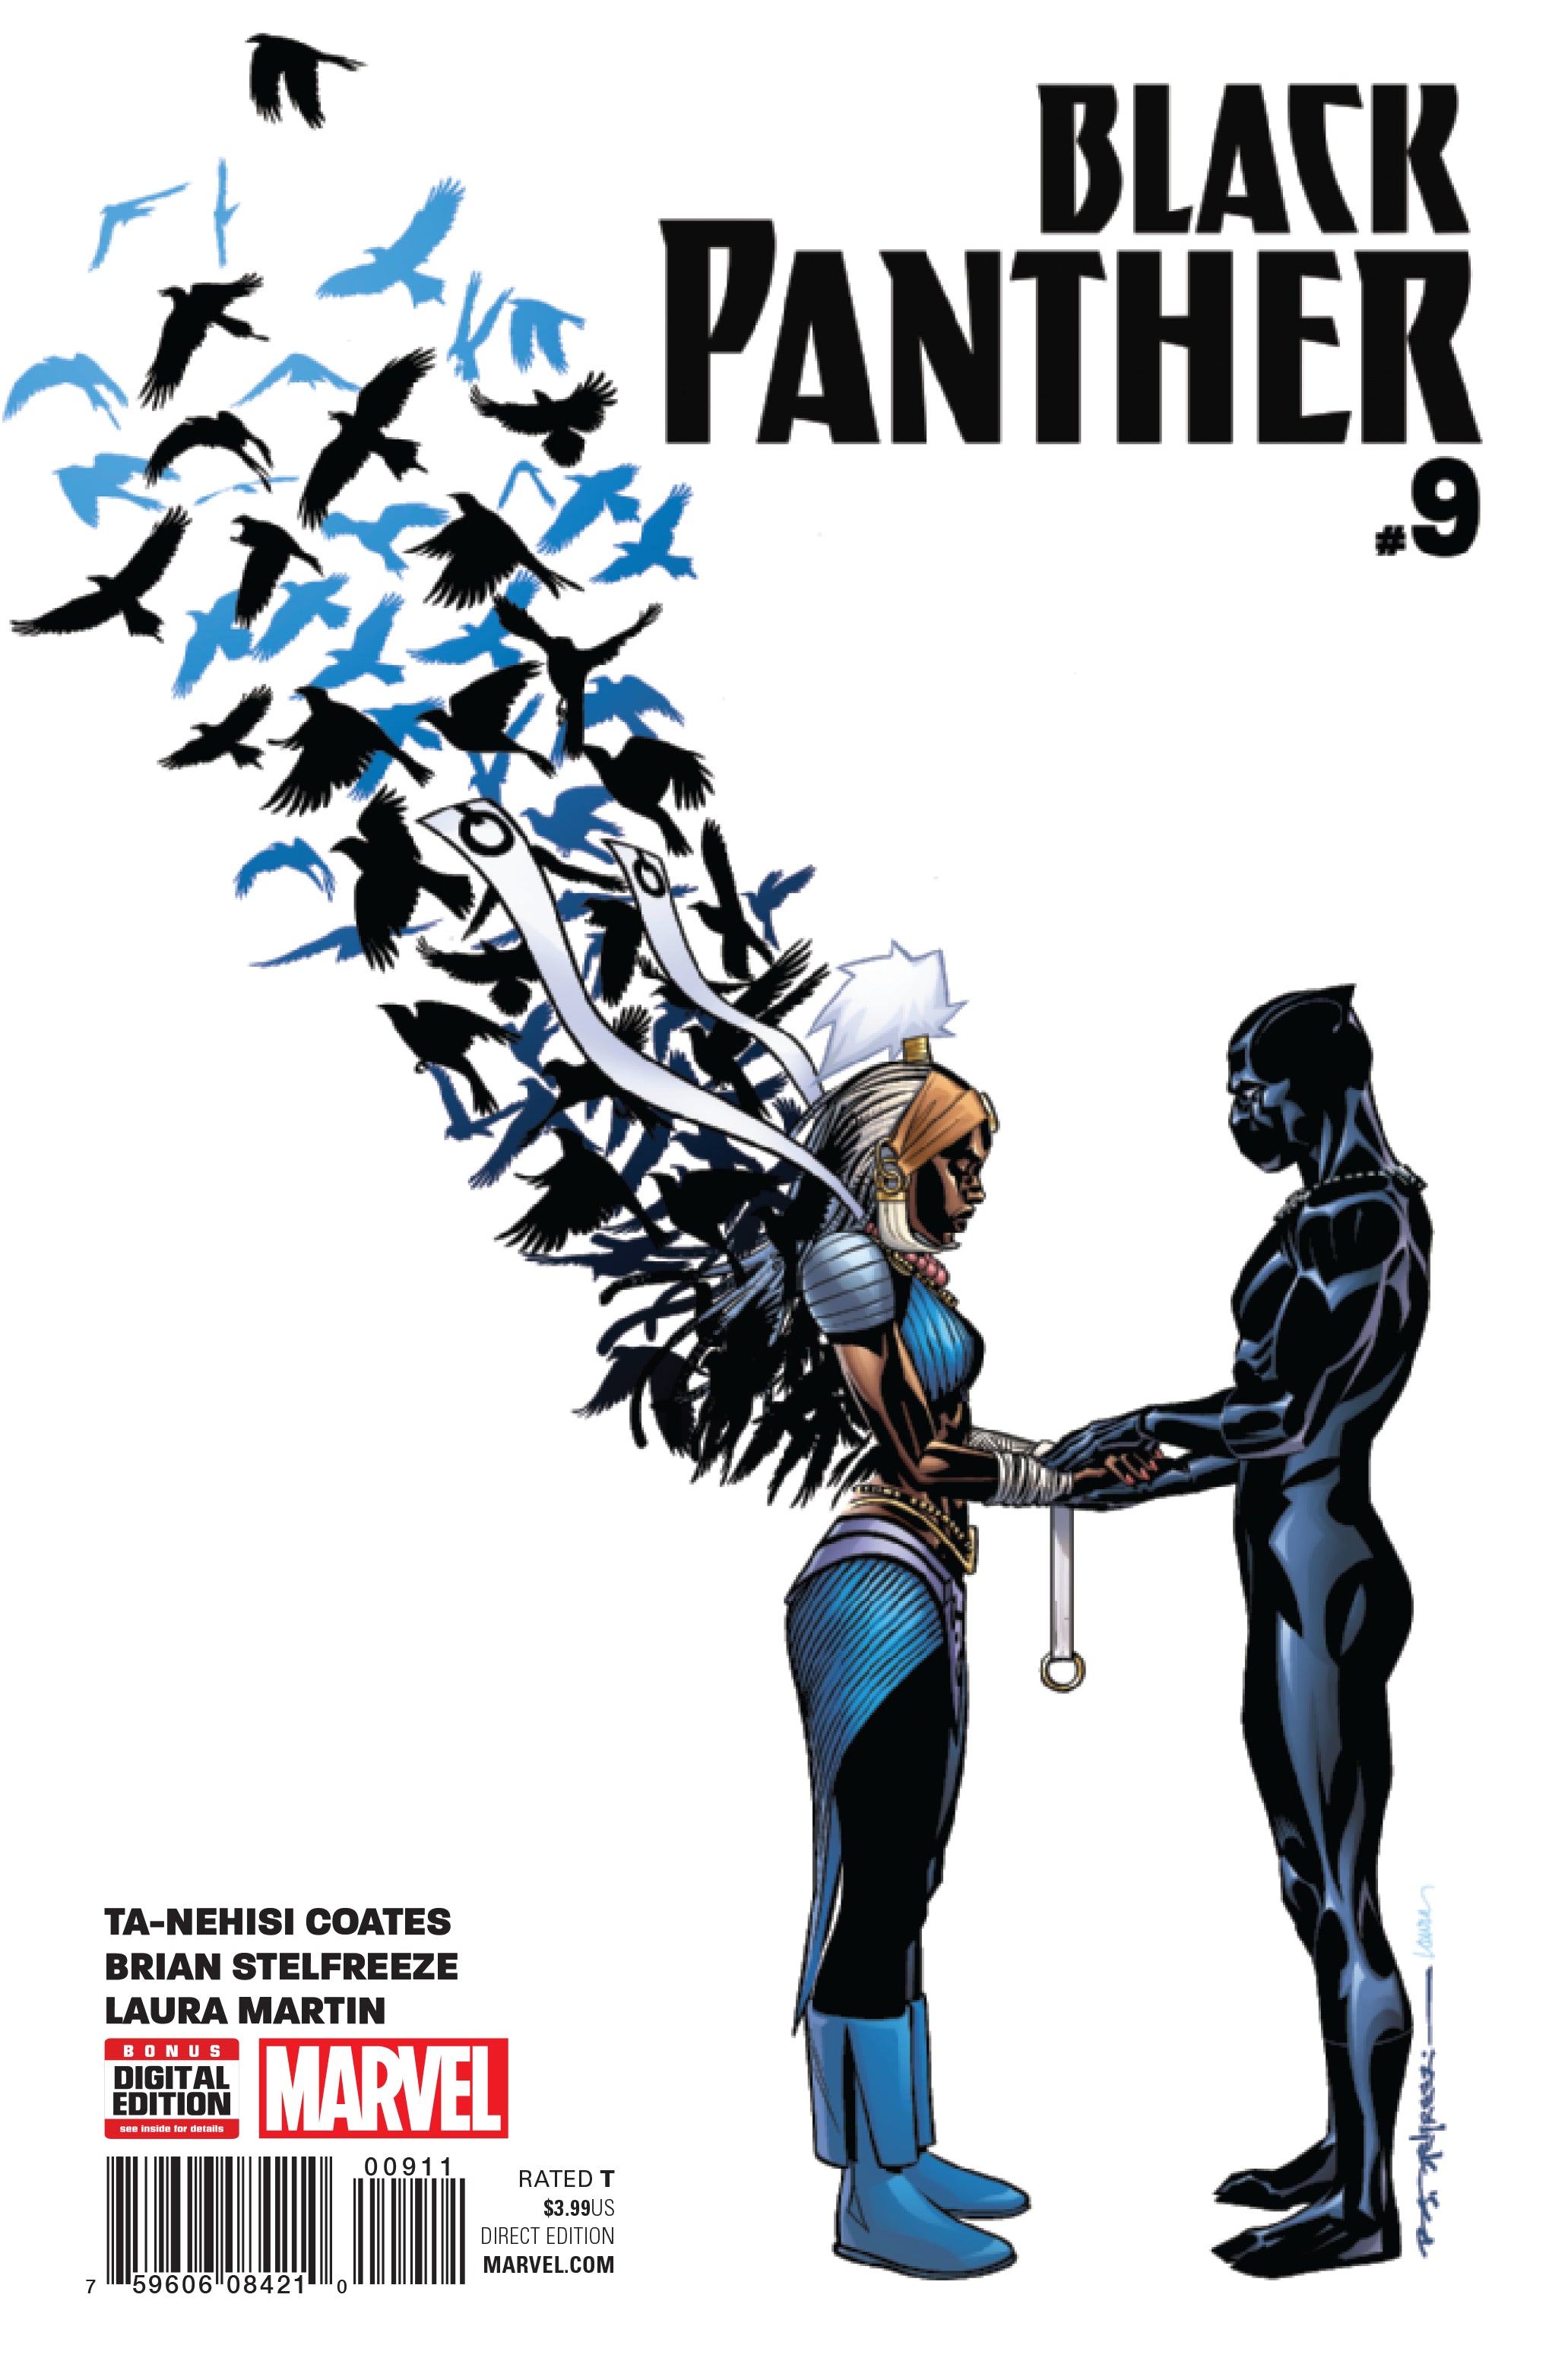 BLACK PANTHER #9 | Game Master's Emporium (The New GME)